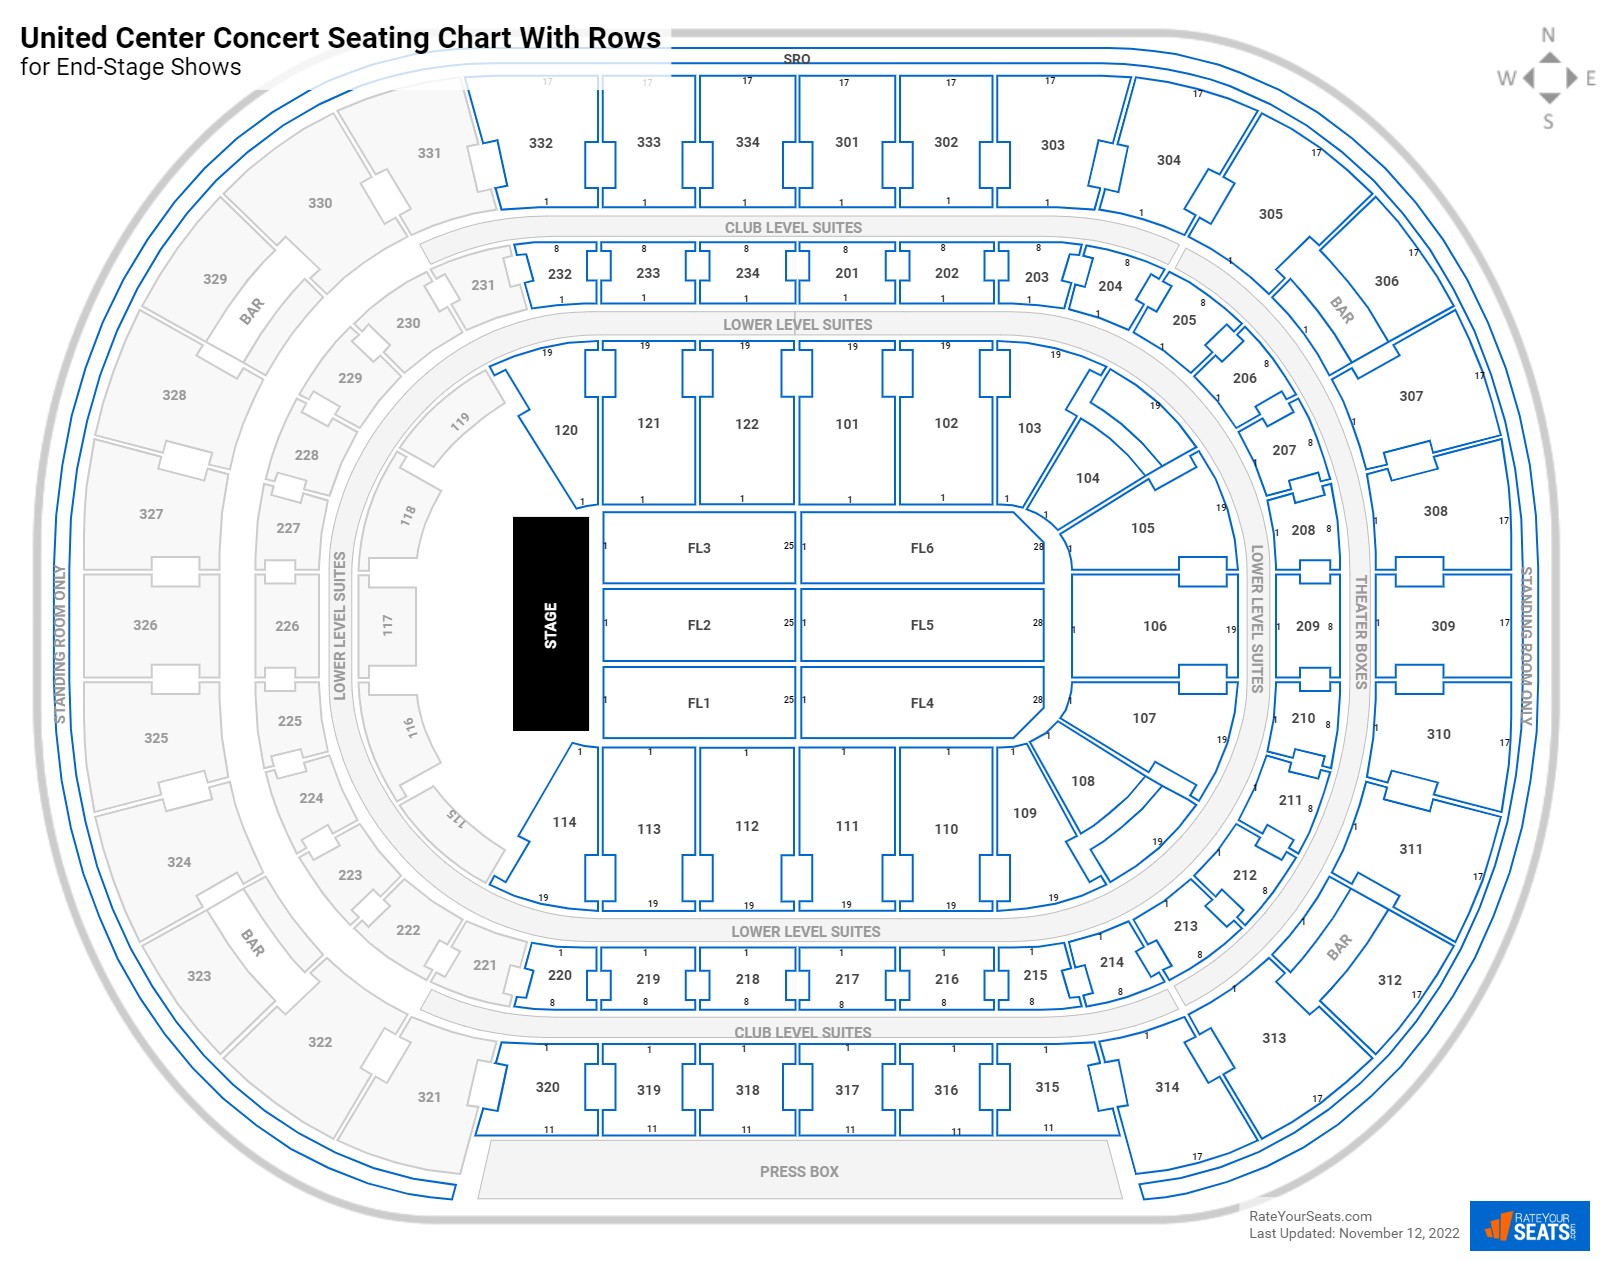 United Center Seating Charts for Concerts